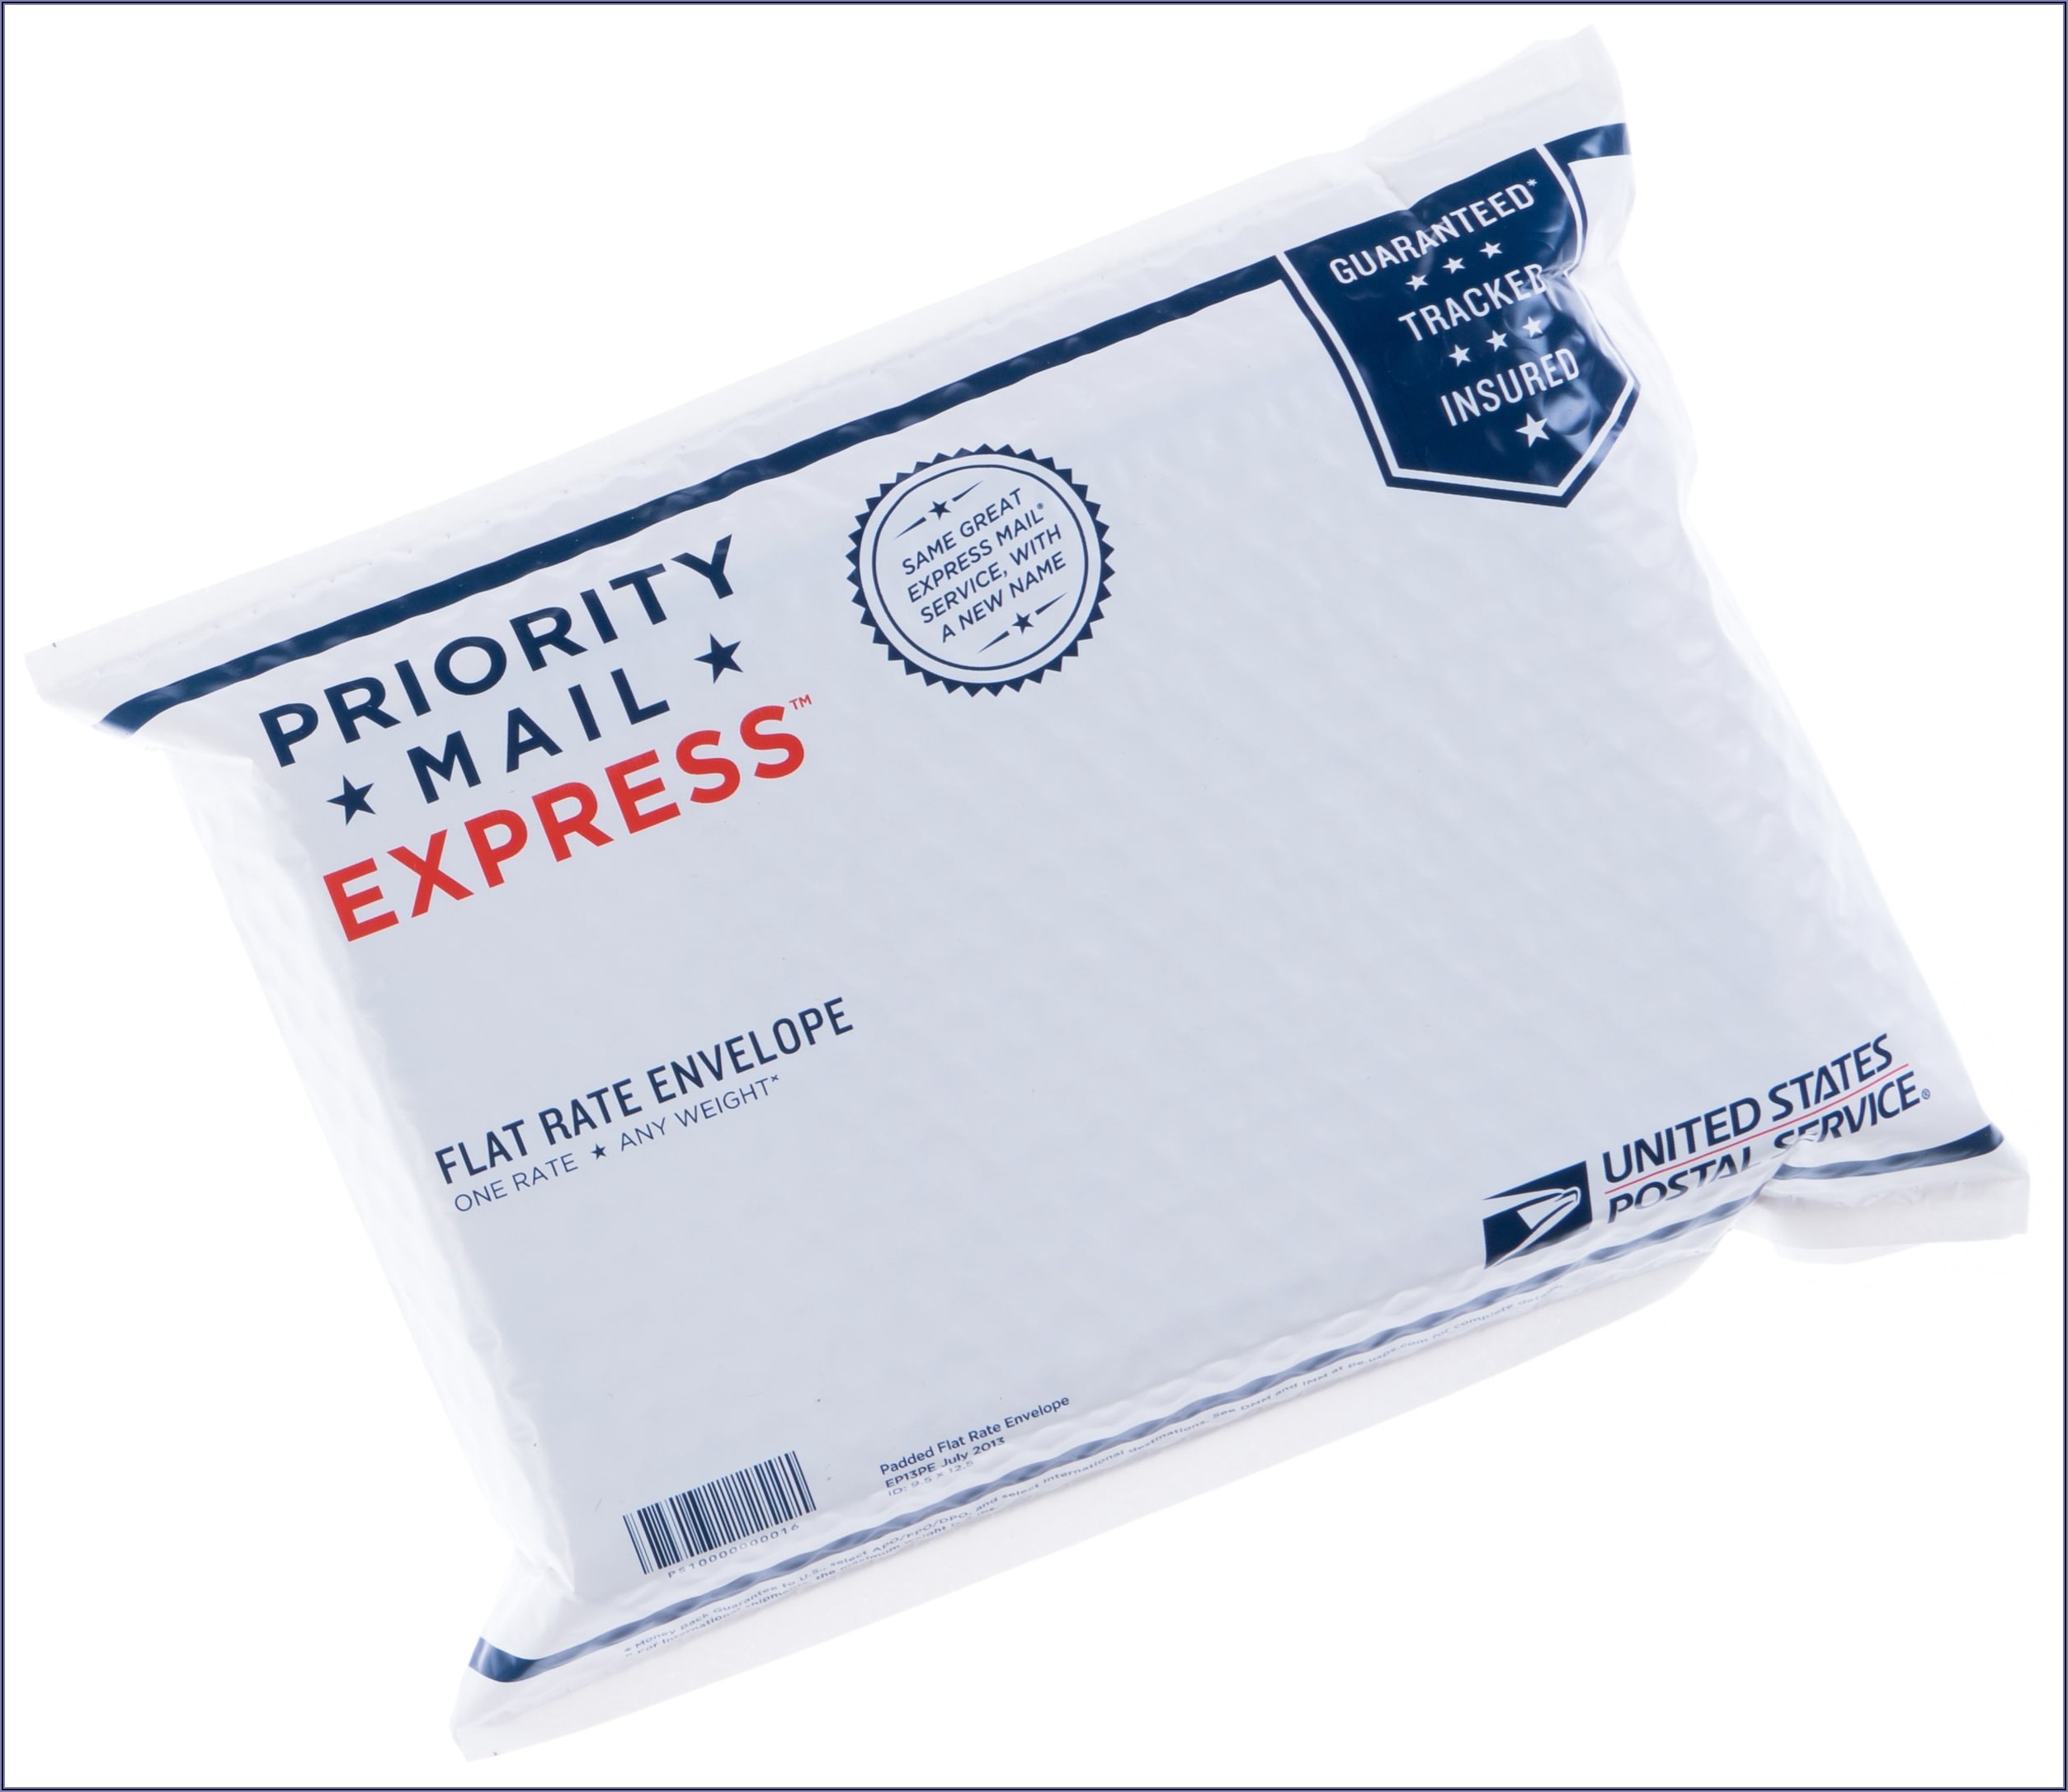 Usps Priority Mail Express Envelope Cost